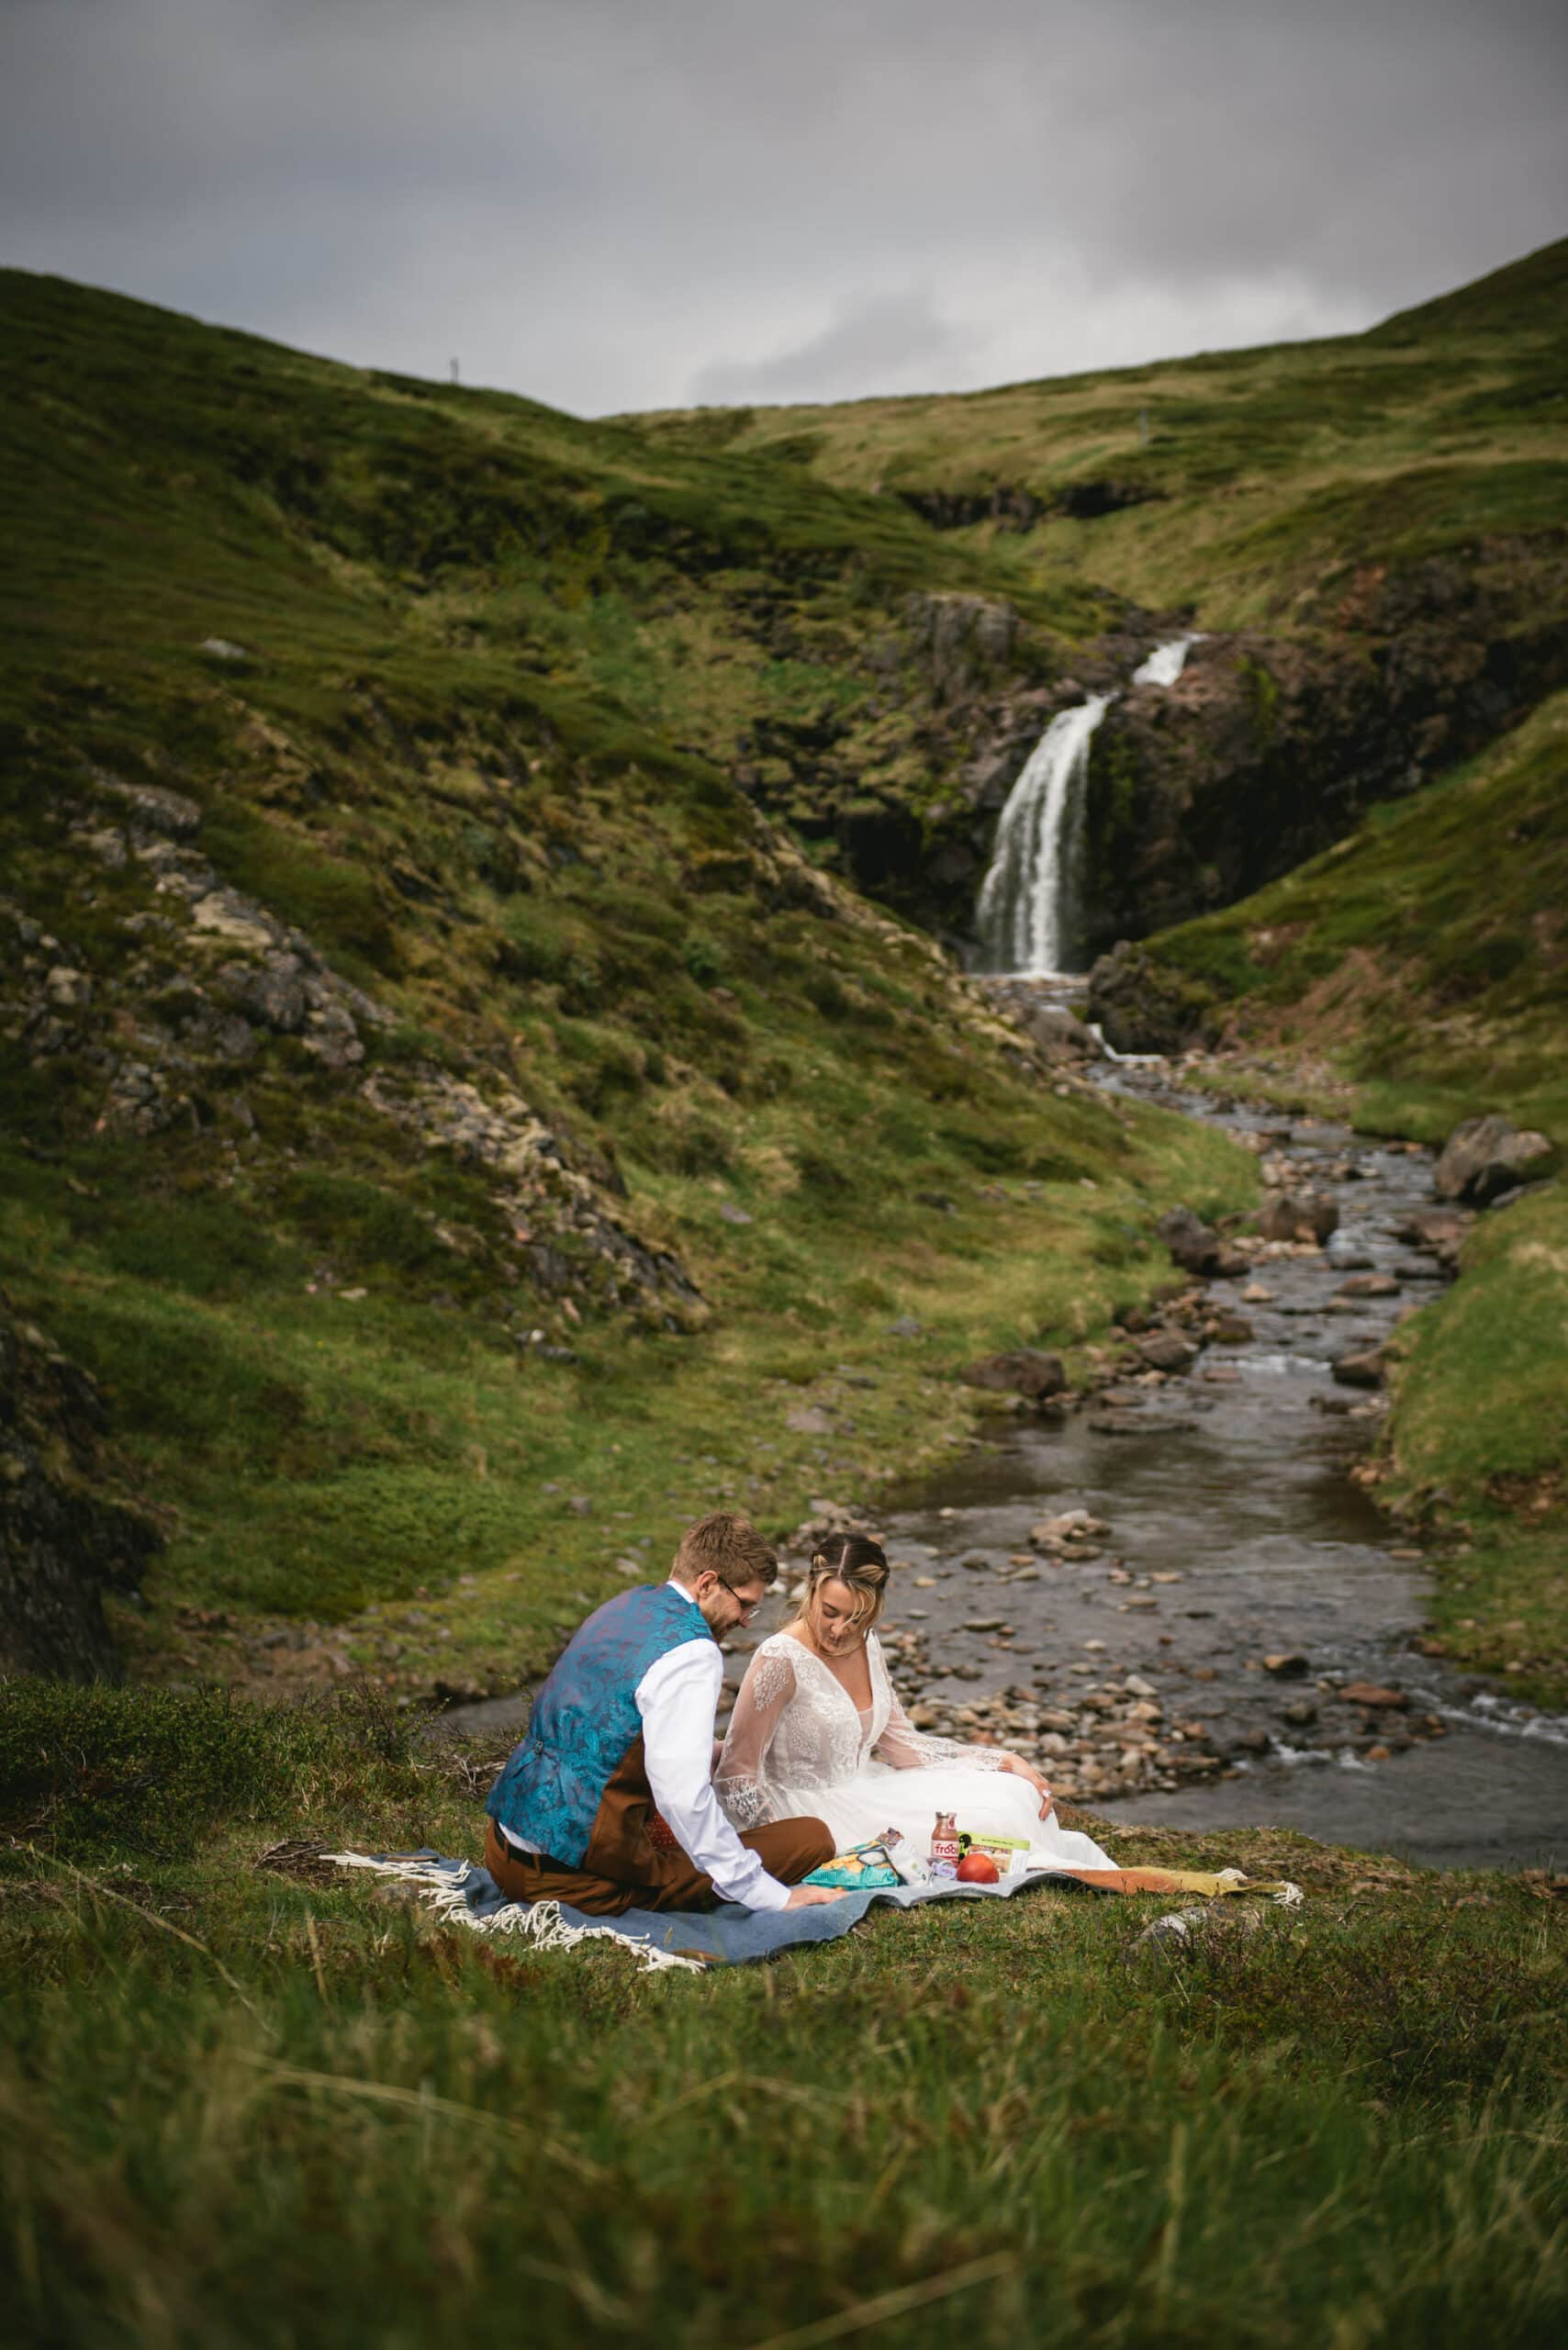 The couple's love story etched against the untouched beauty of the Icelandic wilderness.